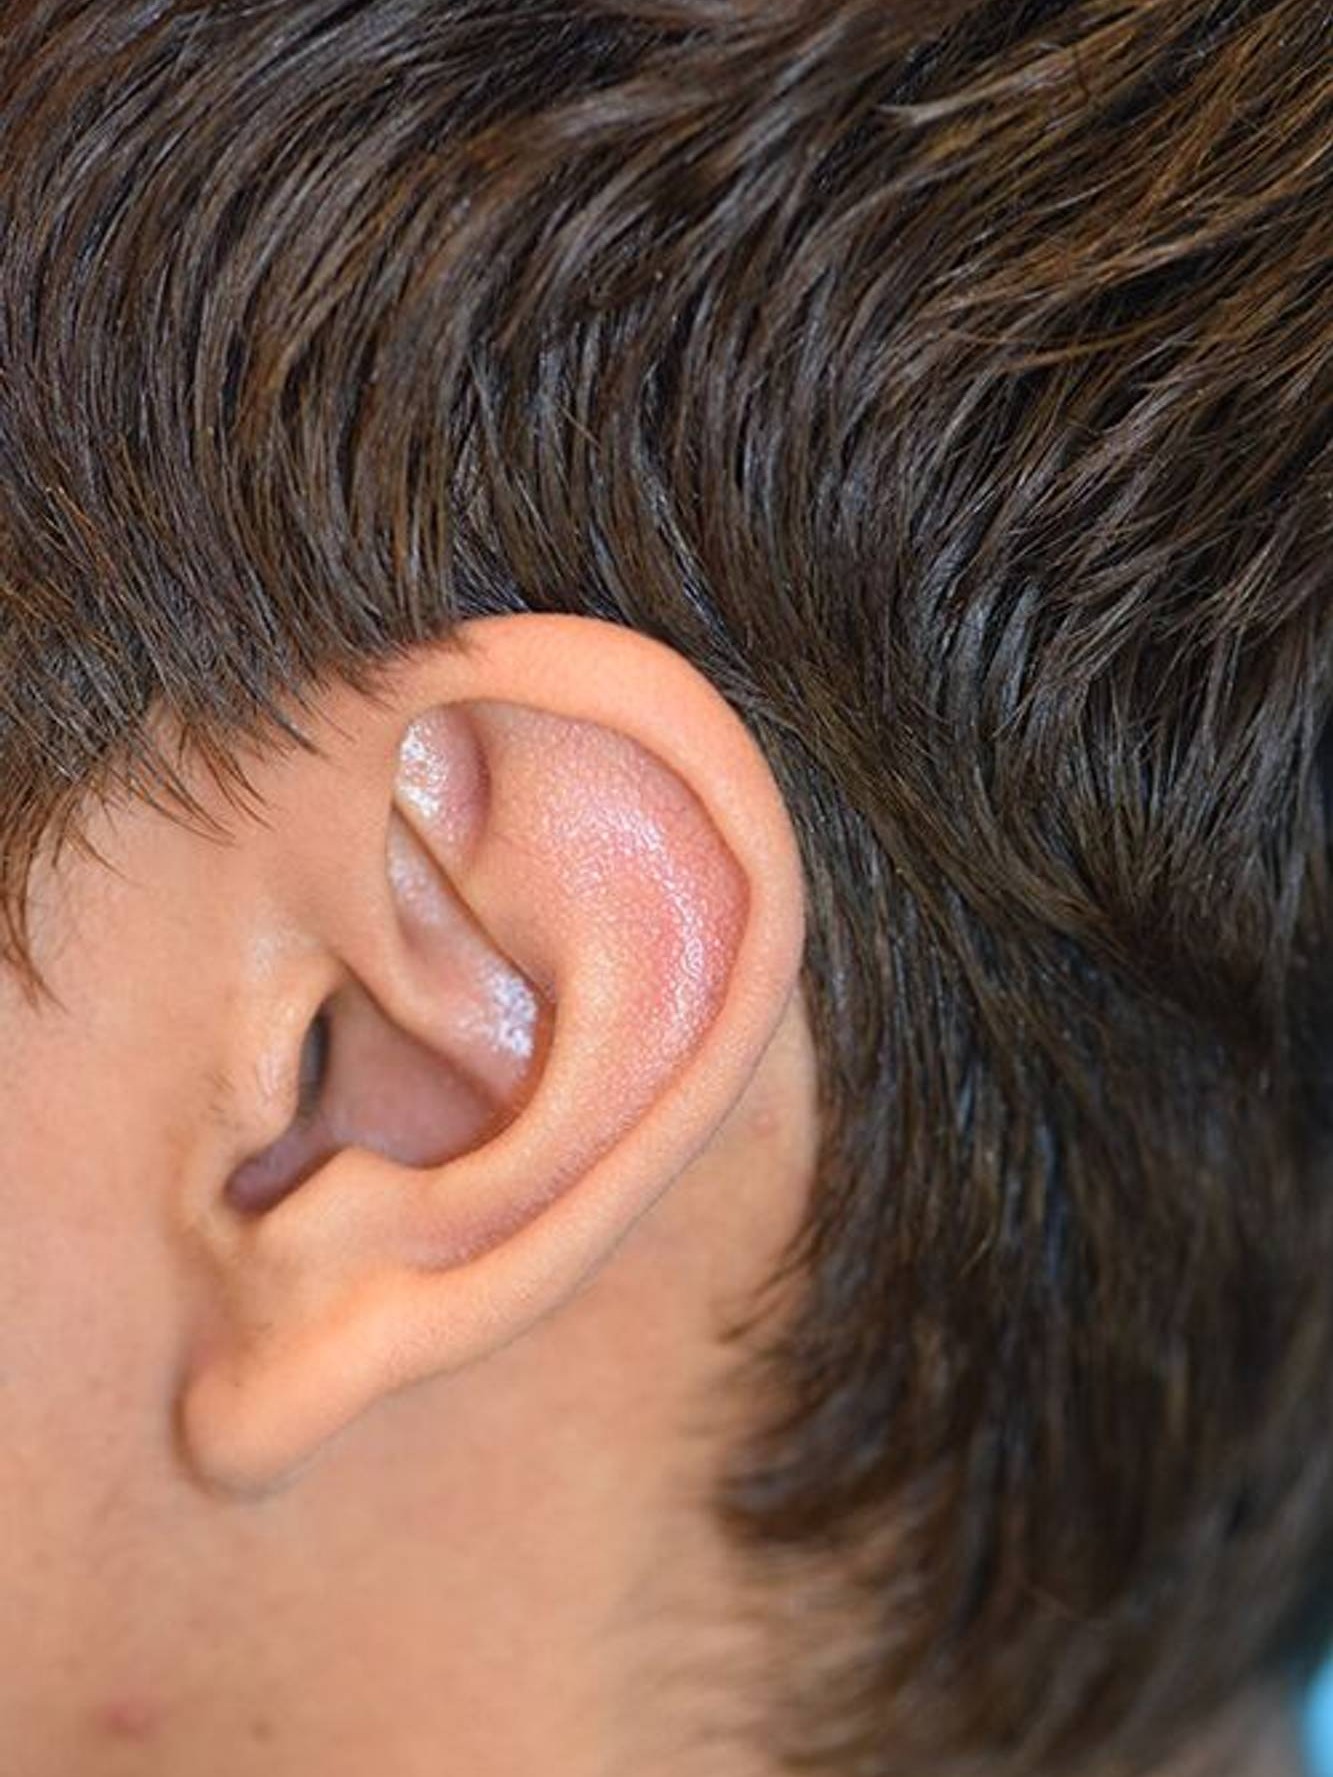 Ear Reshaping Before & After Image